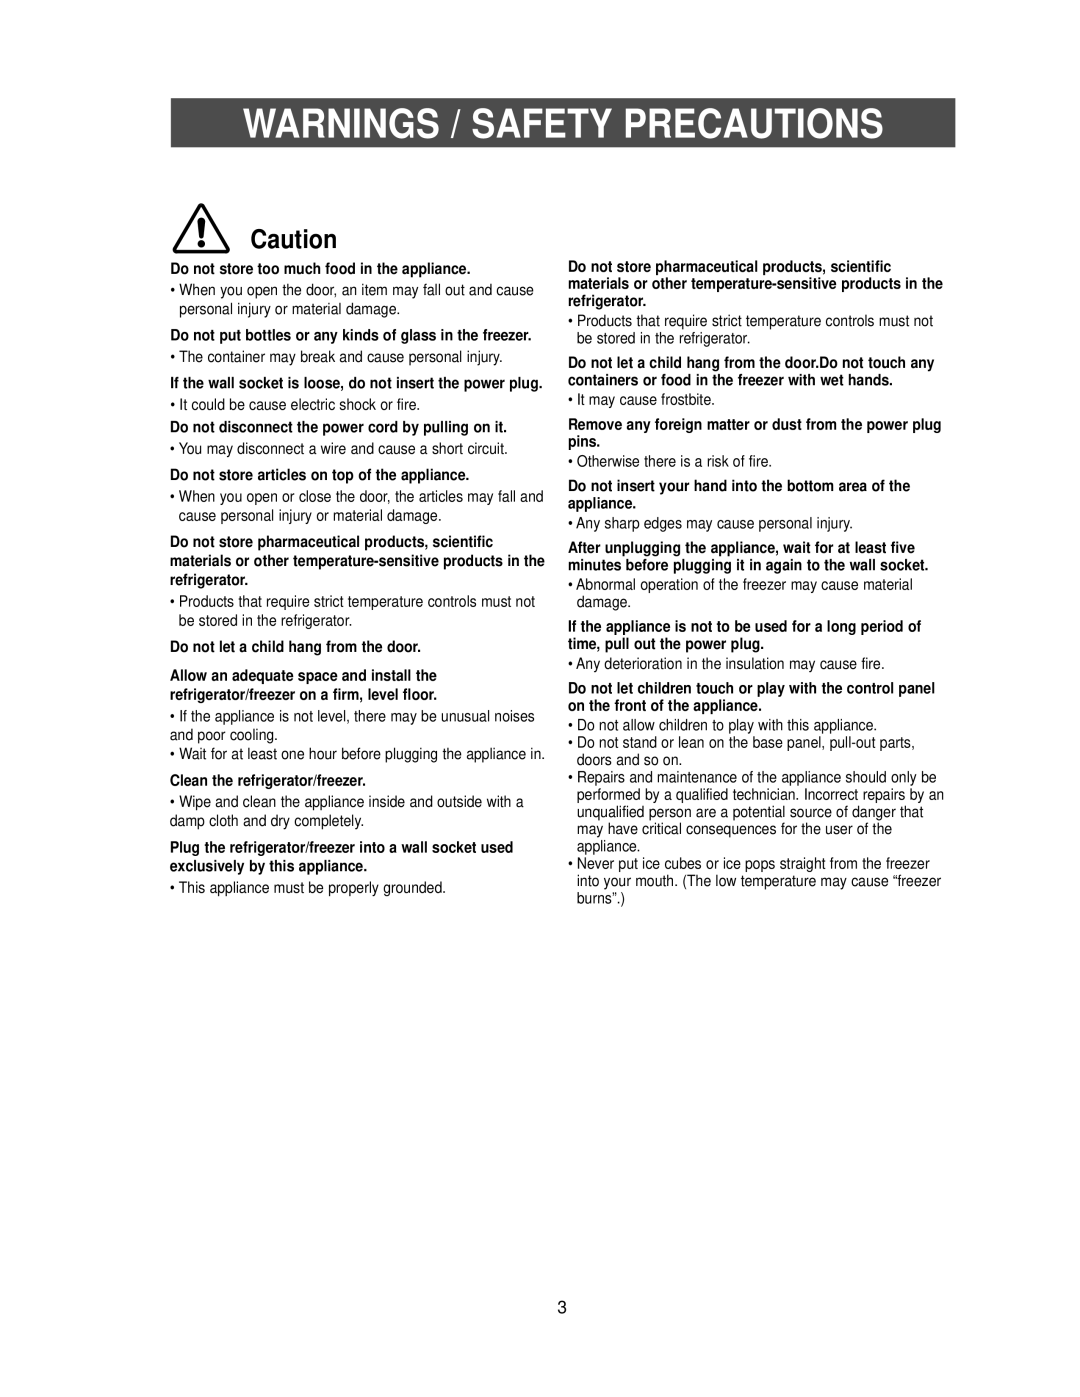 Samsung RB2055SL owner manual Warnings / Safety Precautions, Wait for at least one hour before plugging the appliance in 